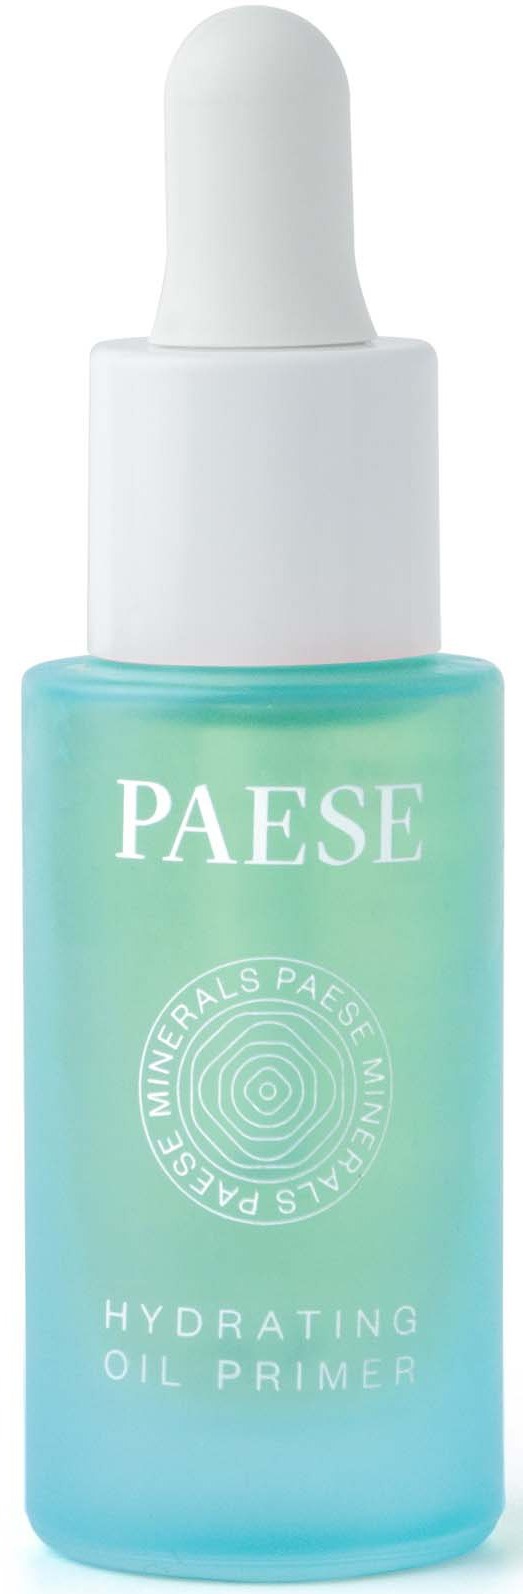 Paese Hydrating Oil Primer